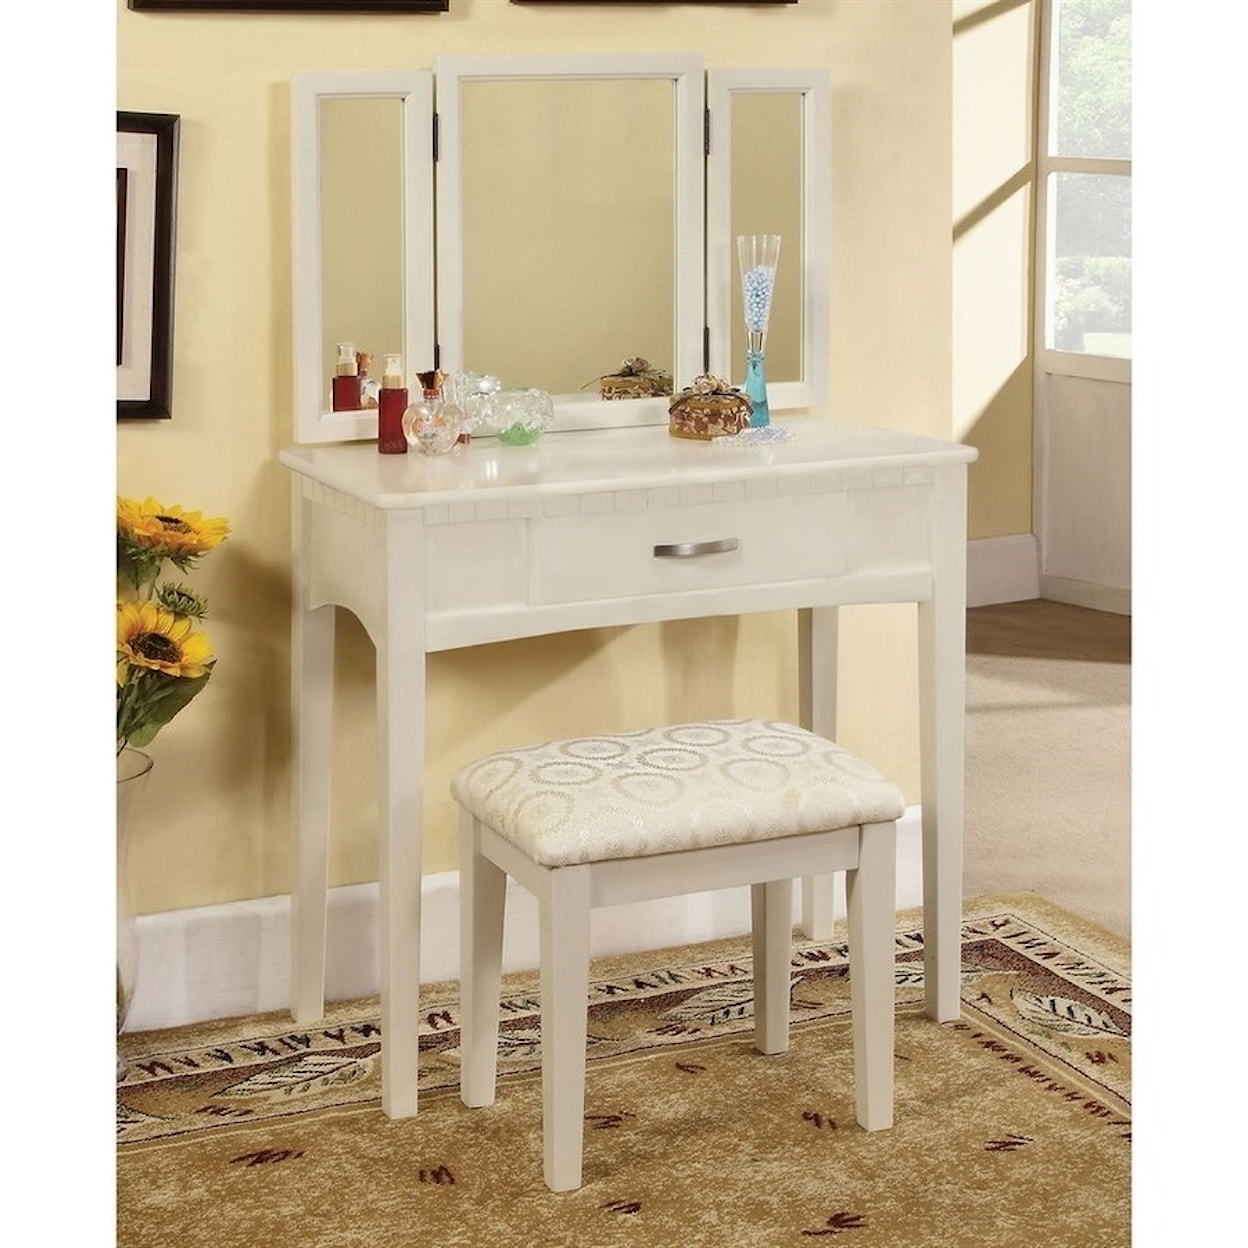 FUSA Potterville Vanity Table with Stool